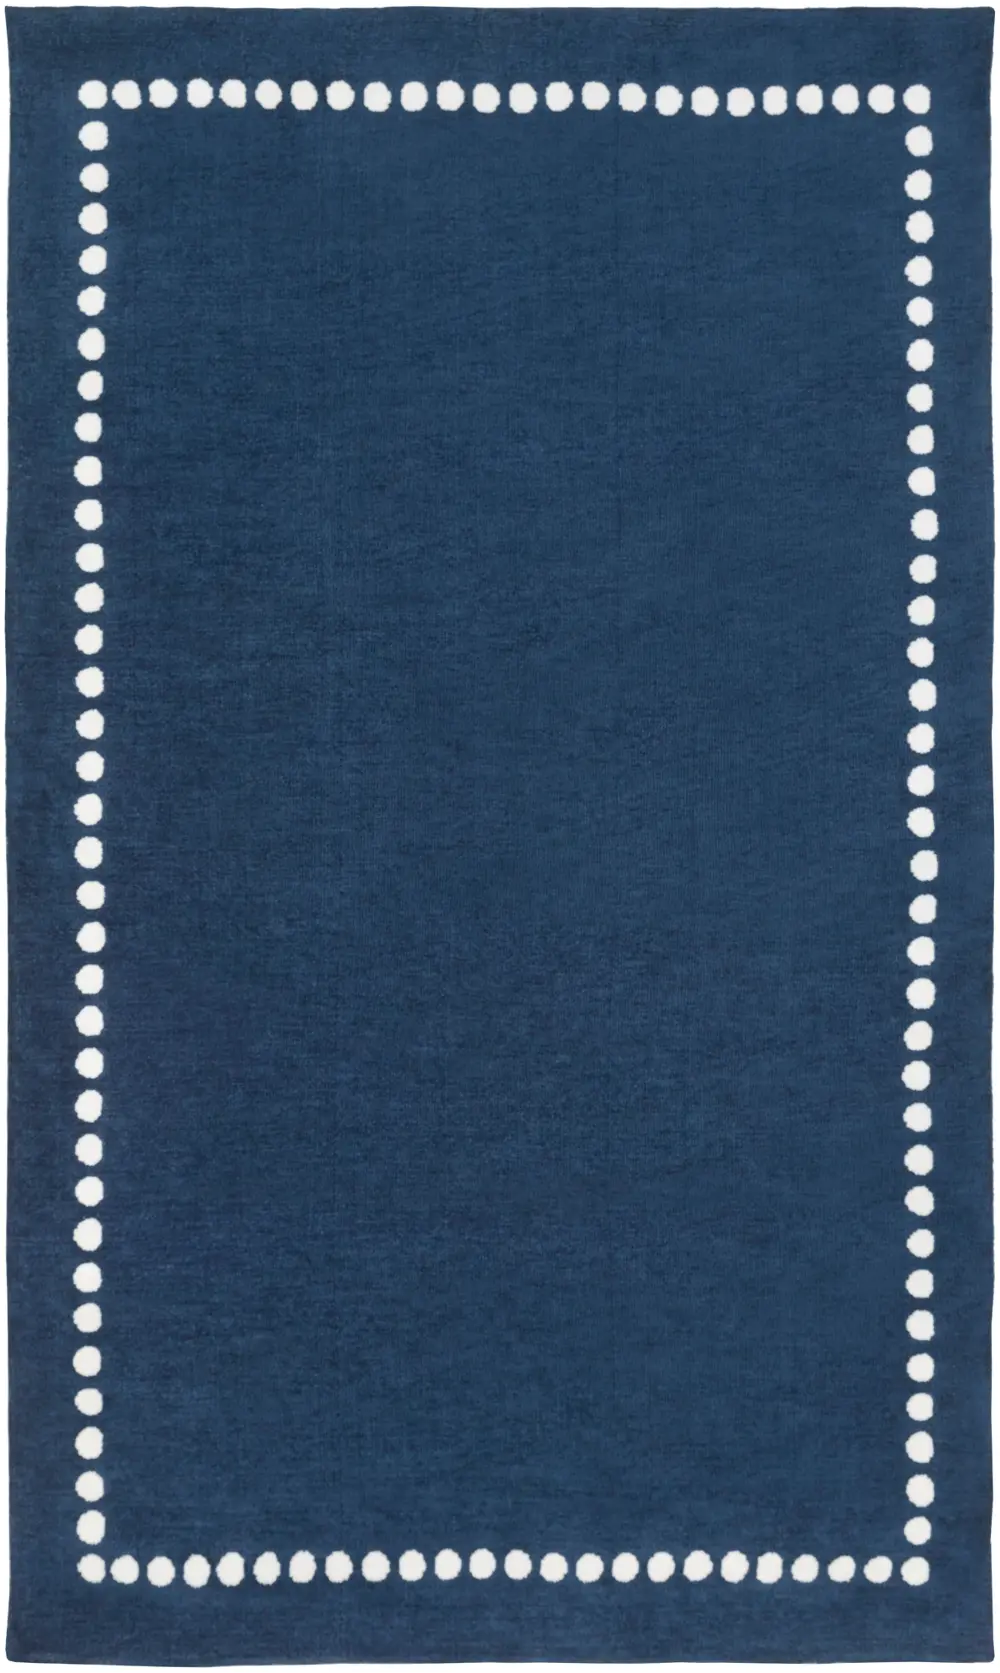 8 x 11 Large Navy Blue and Cream Kids Area Rug - Abigail-1